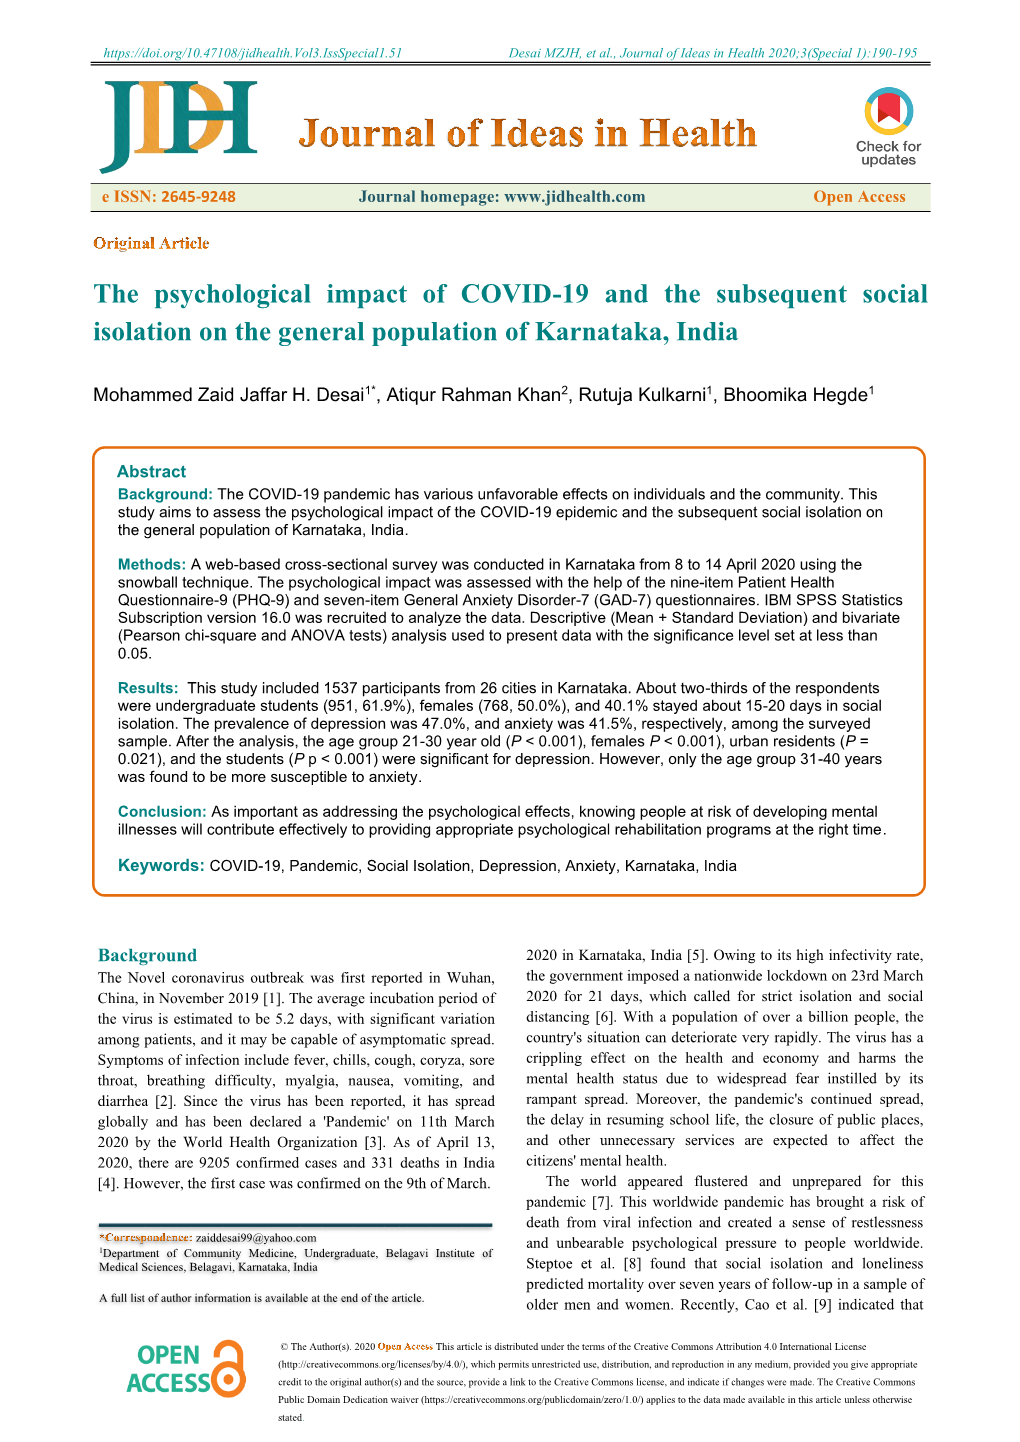 The Psychological Impact of COVID-19 and the Subsequent Social Isolation on the General Population of Karnataka, India